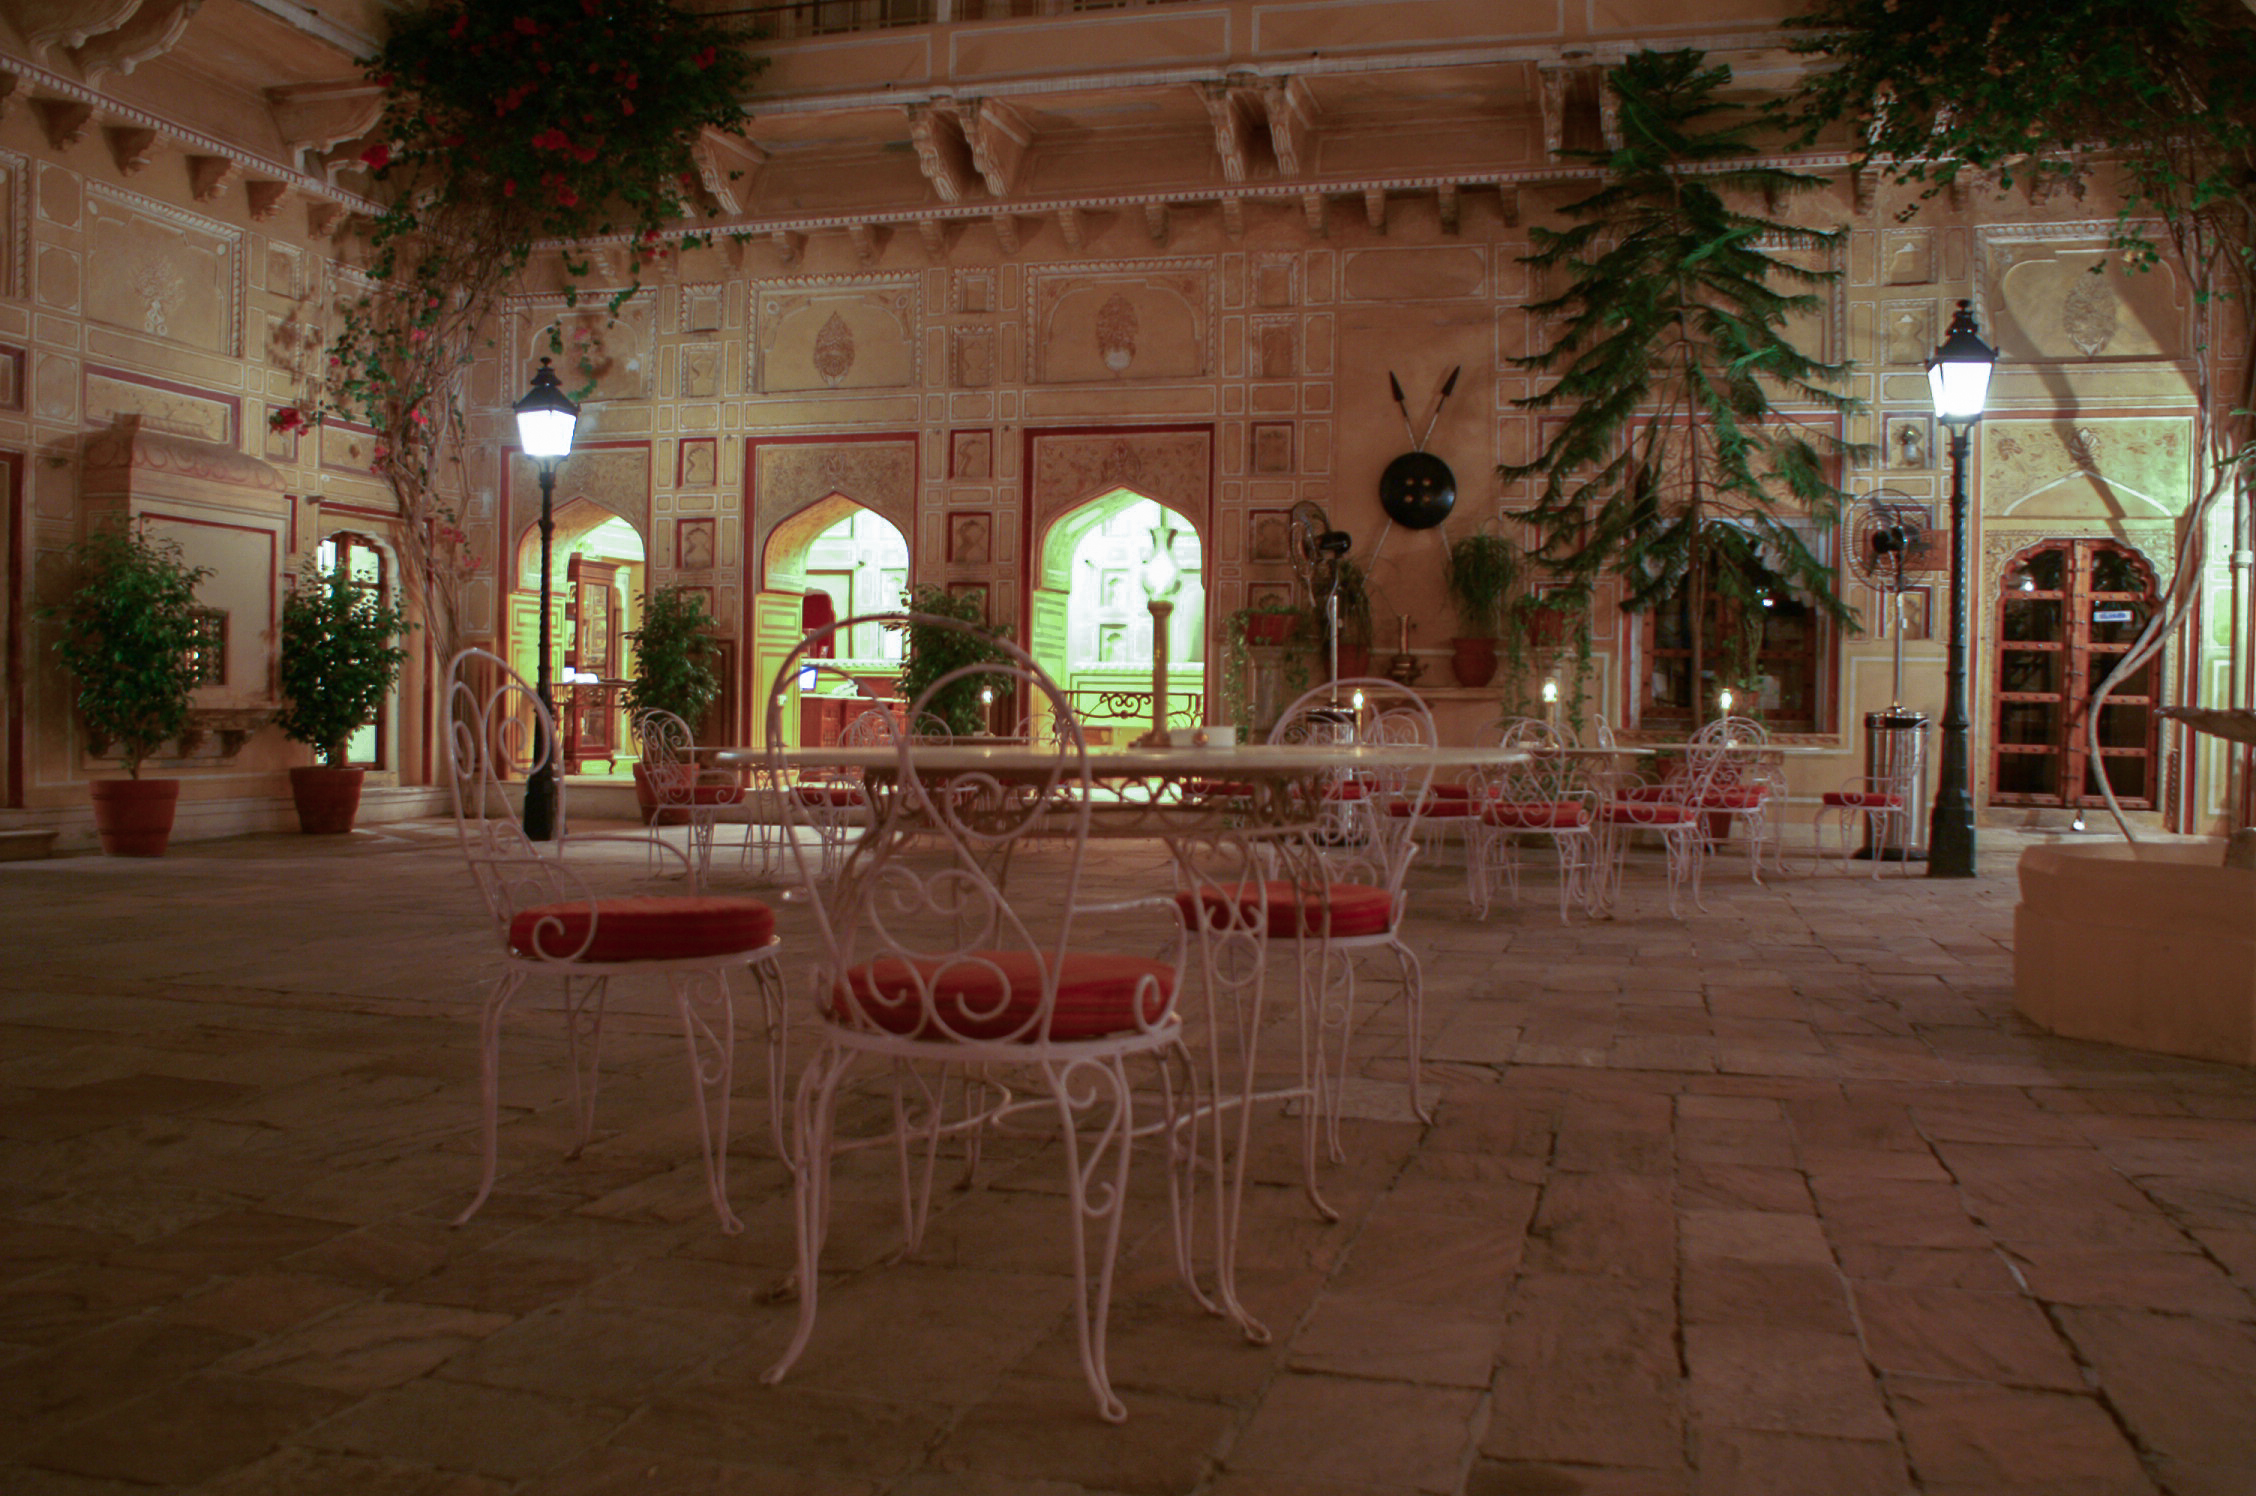 Samode Palace's inner courtyard by night